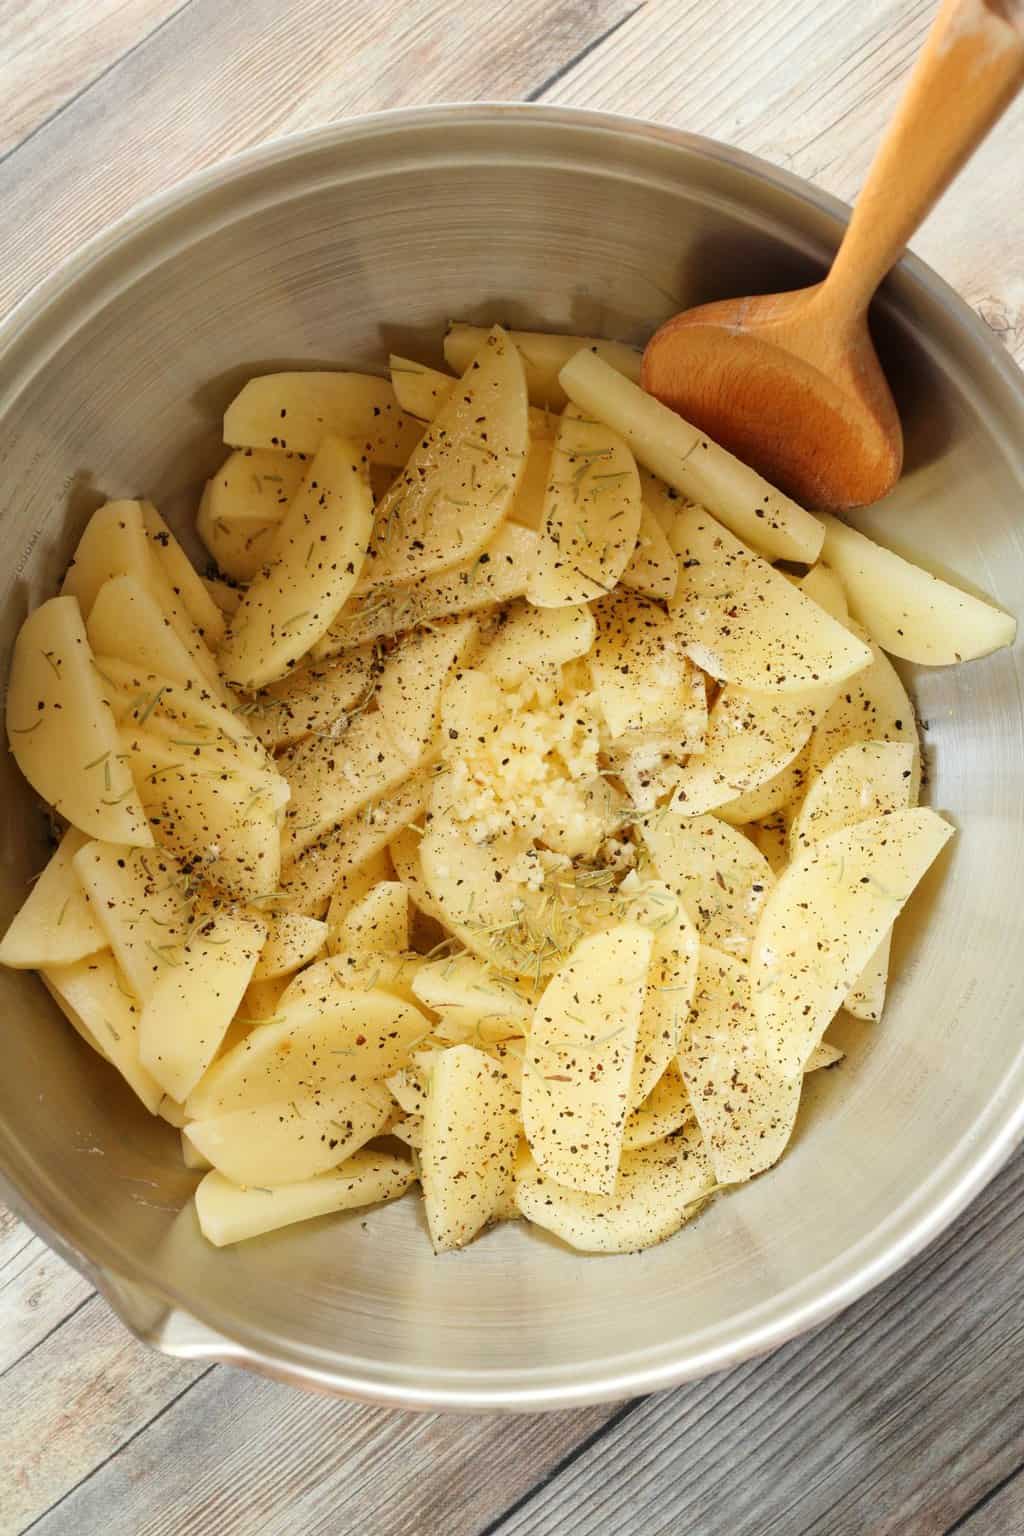 Sliced potatoes and spices in a mixing bowl getting ready to make baked potato fries.